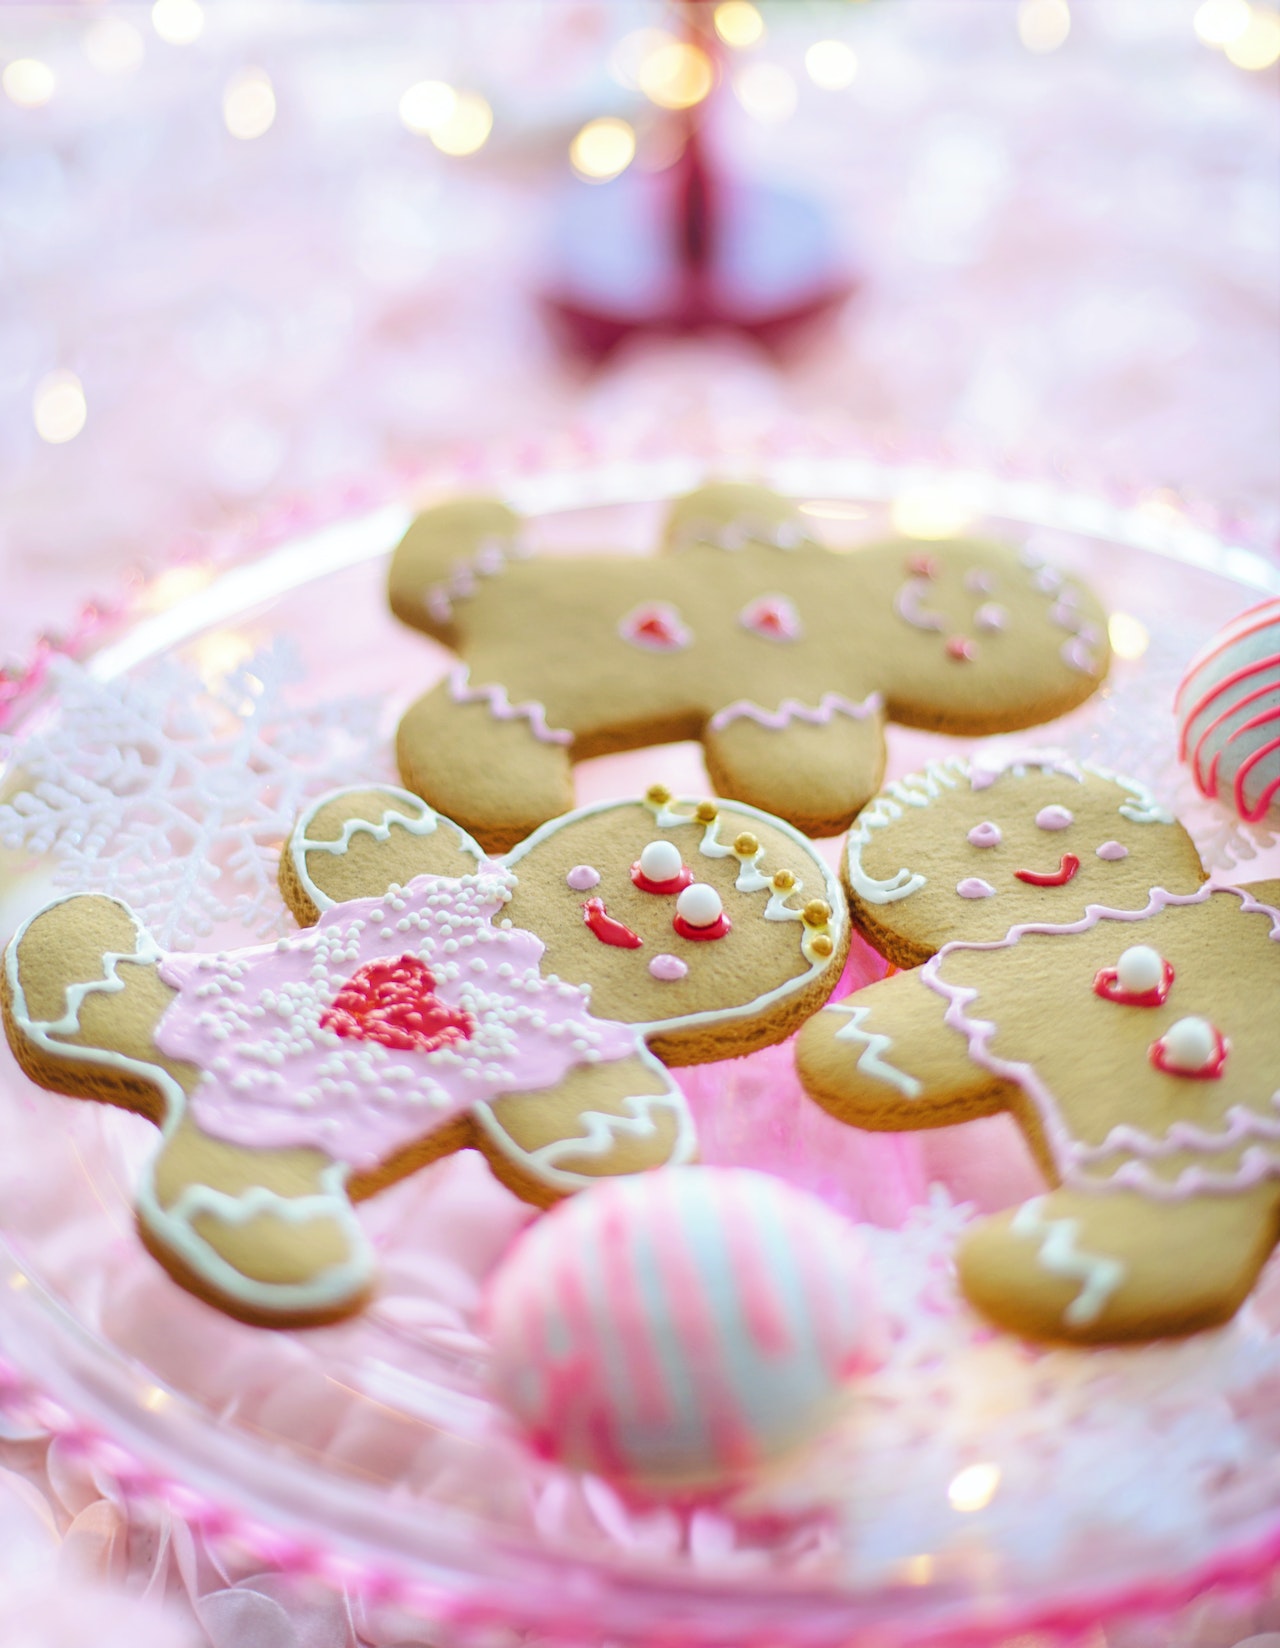 Christmas Snack Ideas to Make Your Holiday Season Merry and Bright